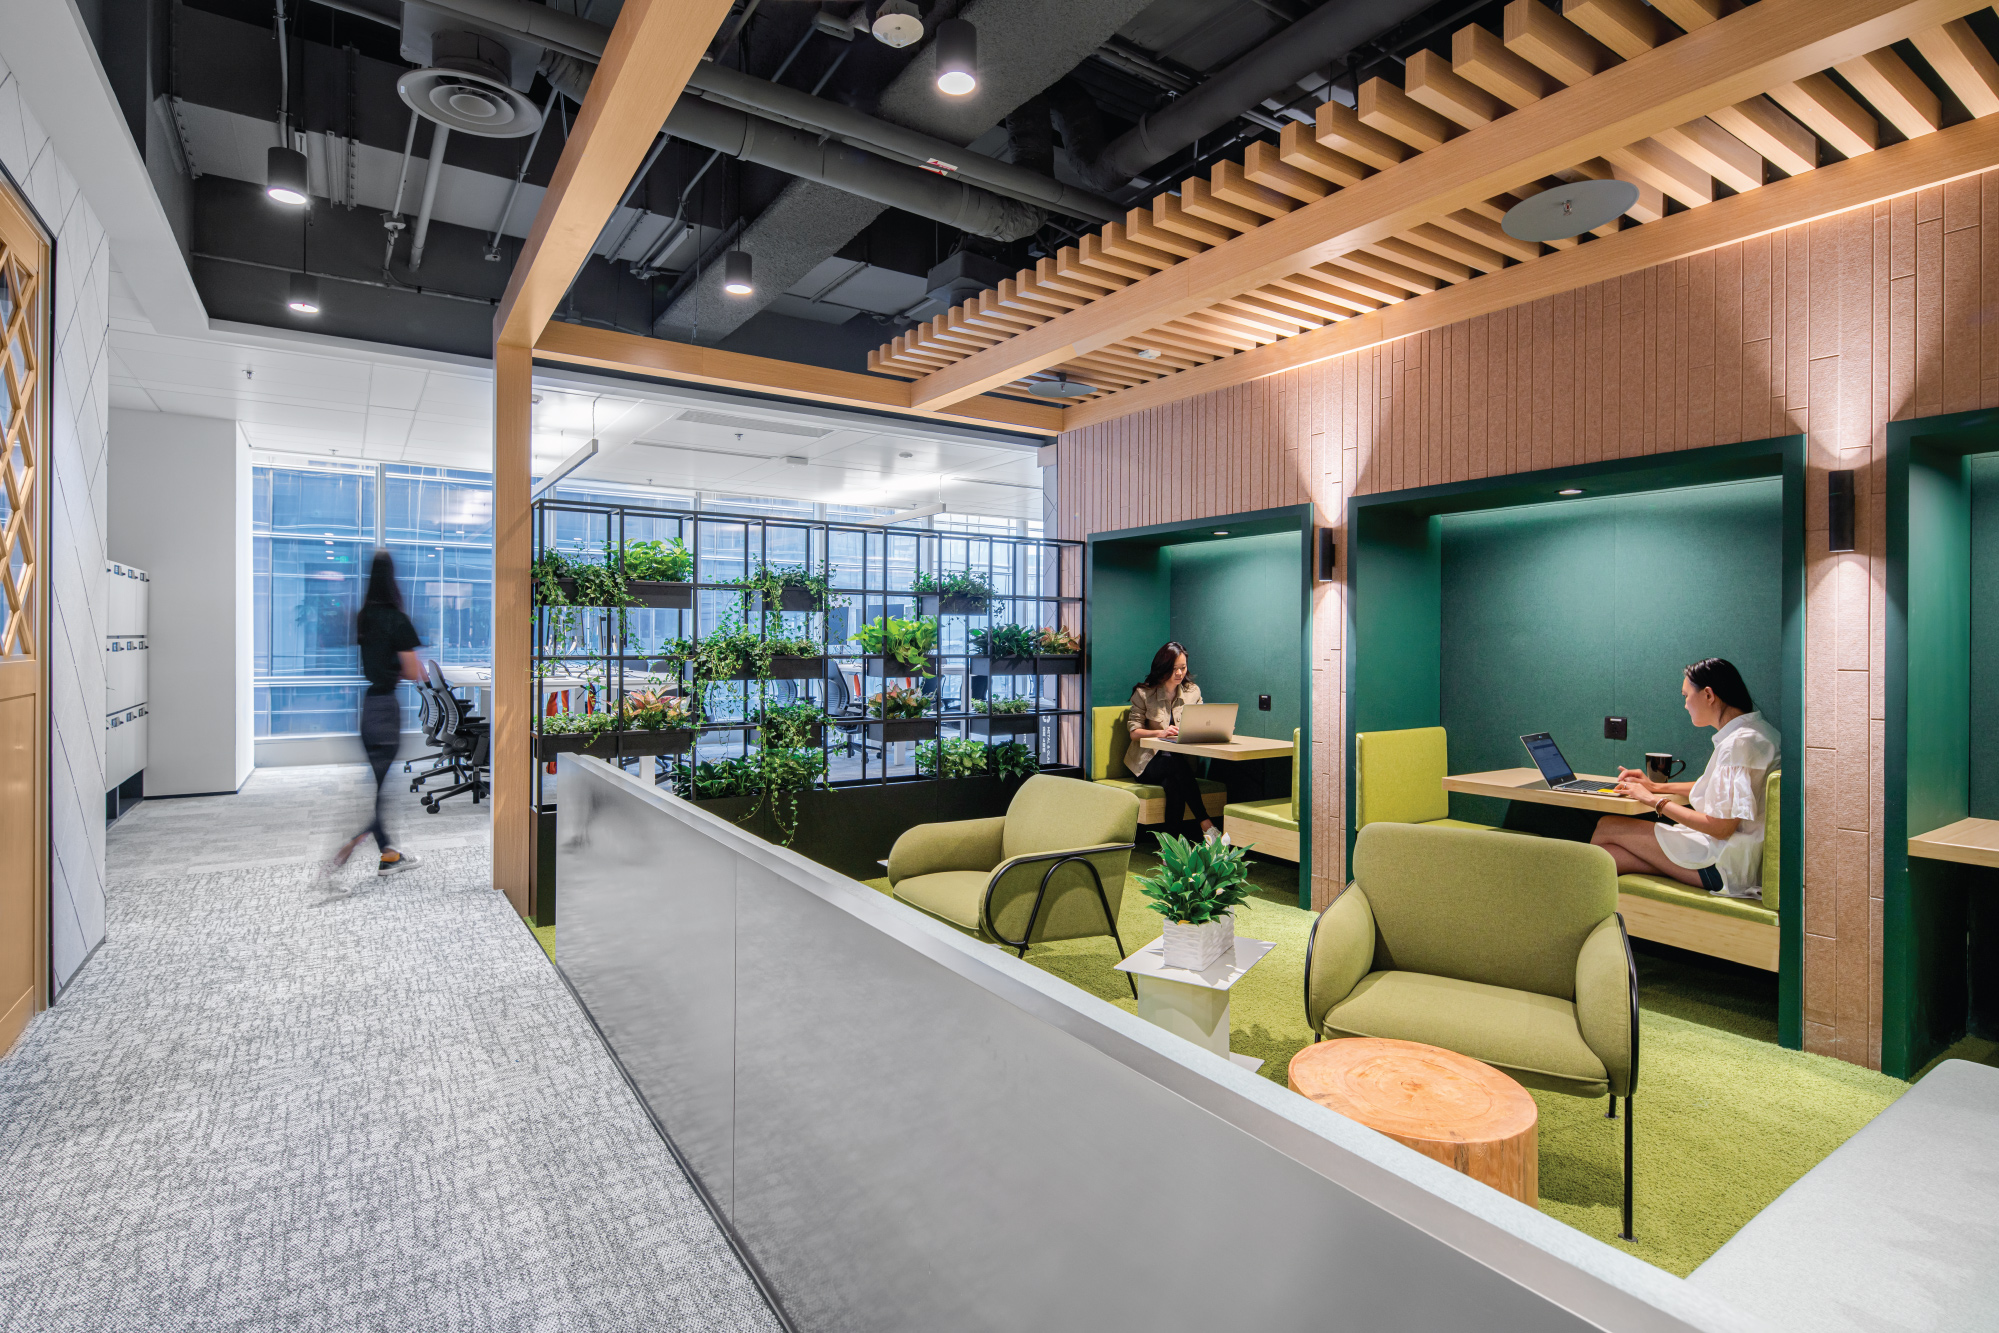 Airbnb’s Beijing workplace - Blended designs & innovation